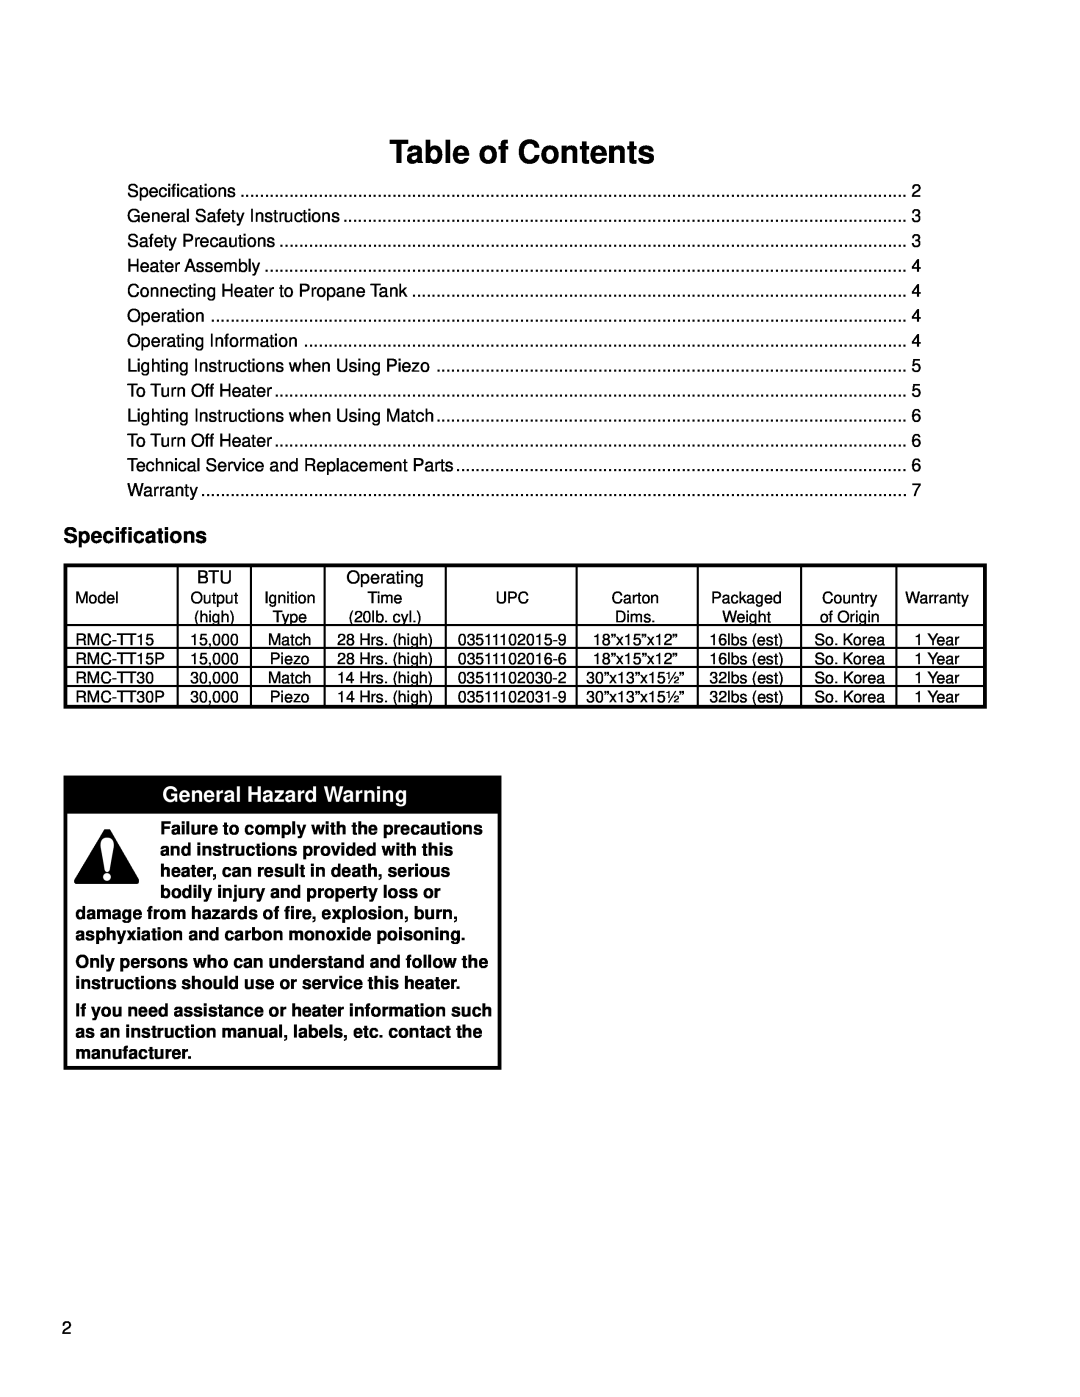 CFM Corporation RMC-TT15P, RMC-TT30P manual Table of Contents, General Hazard Warning, Specifications 